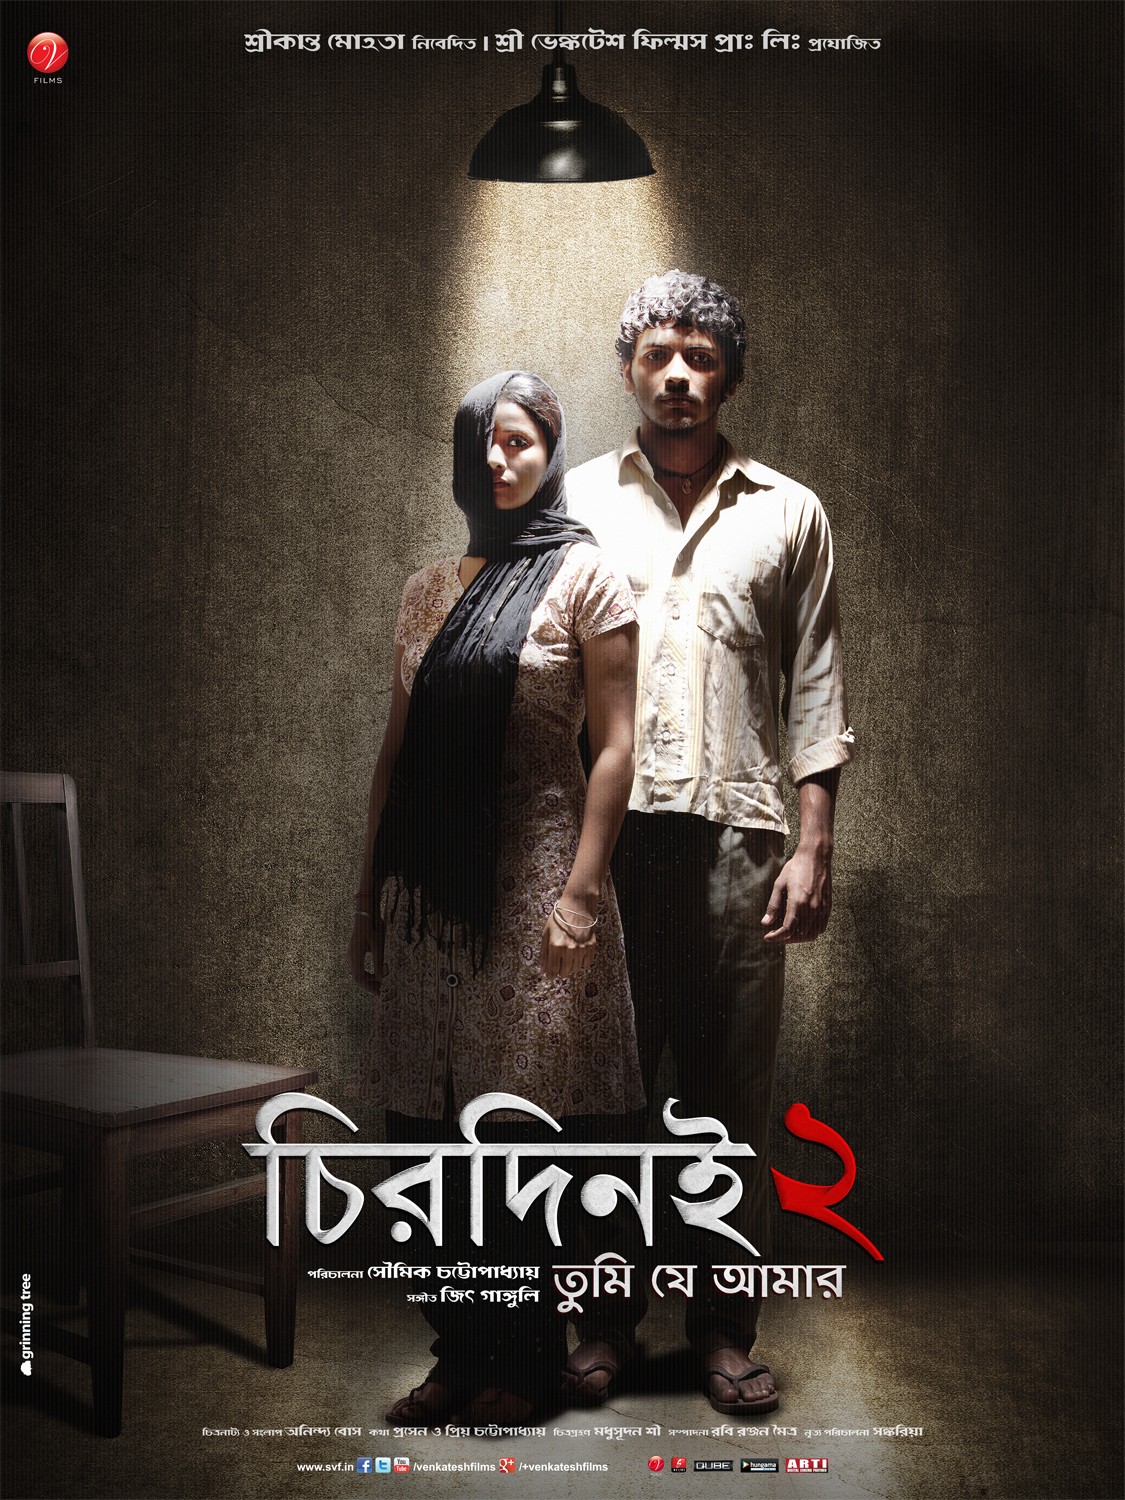 Extra Large Movie Poster Image for Chirodini Tumi Je Amar 2 (#3 of 3)